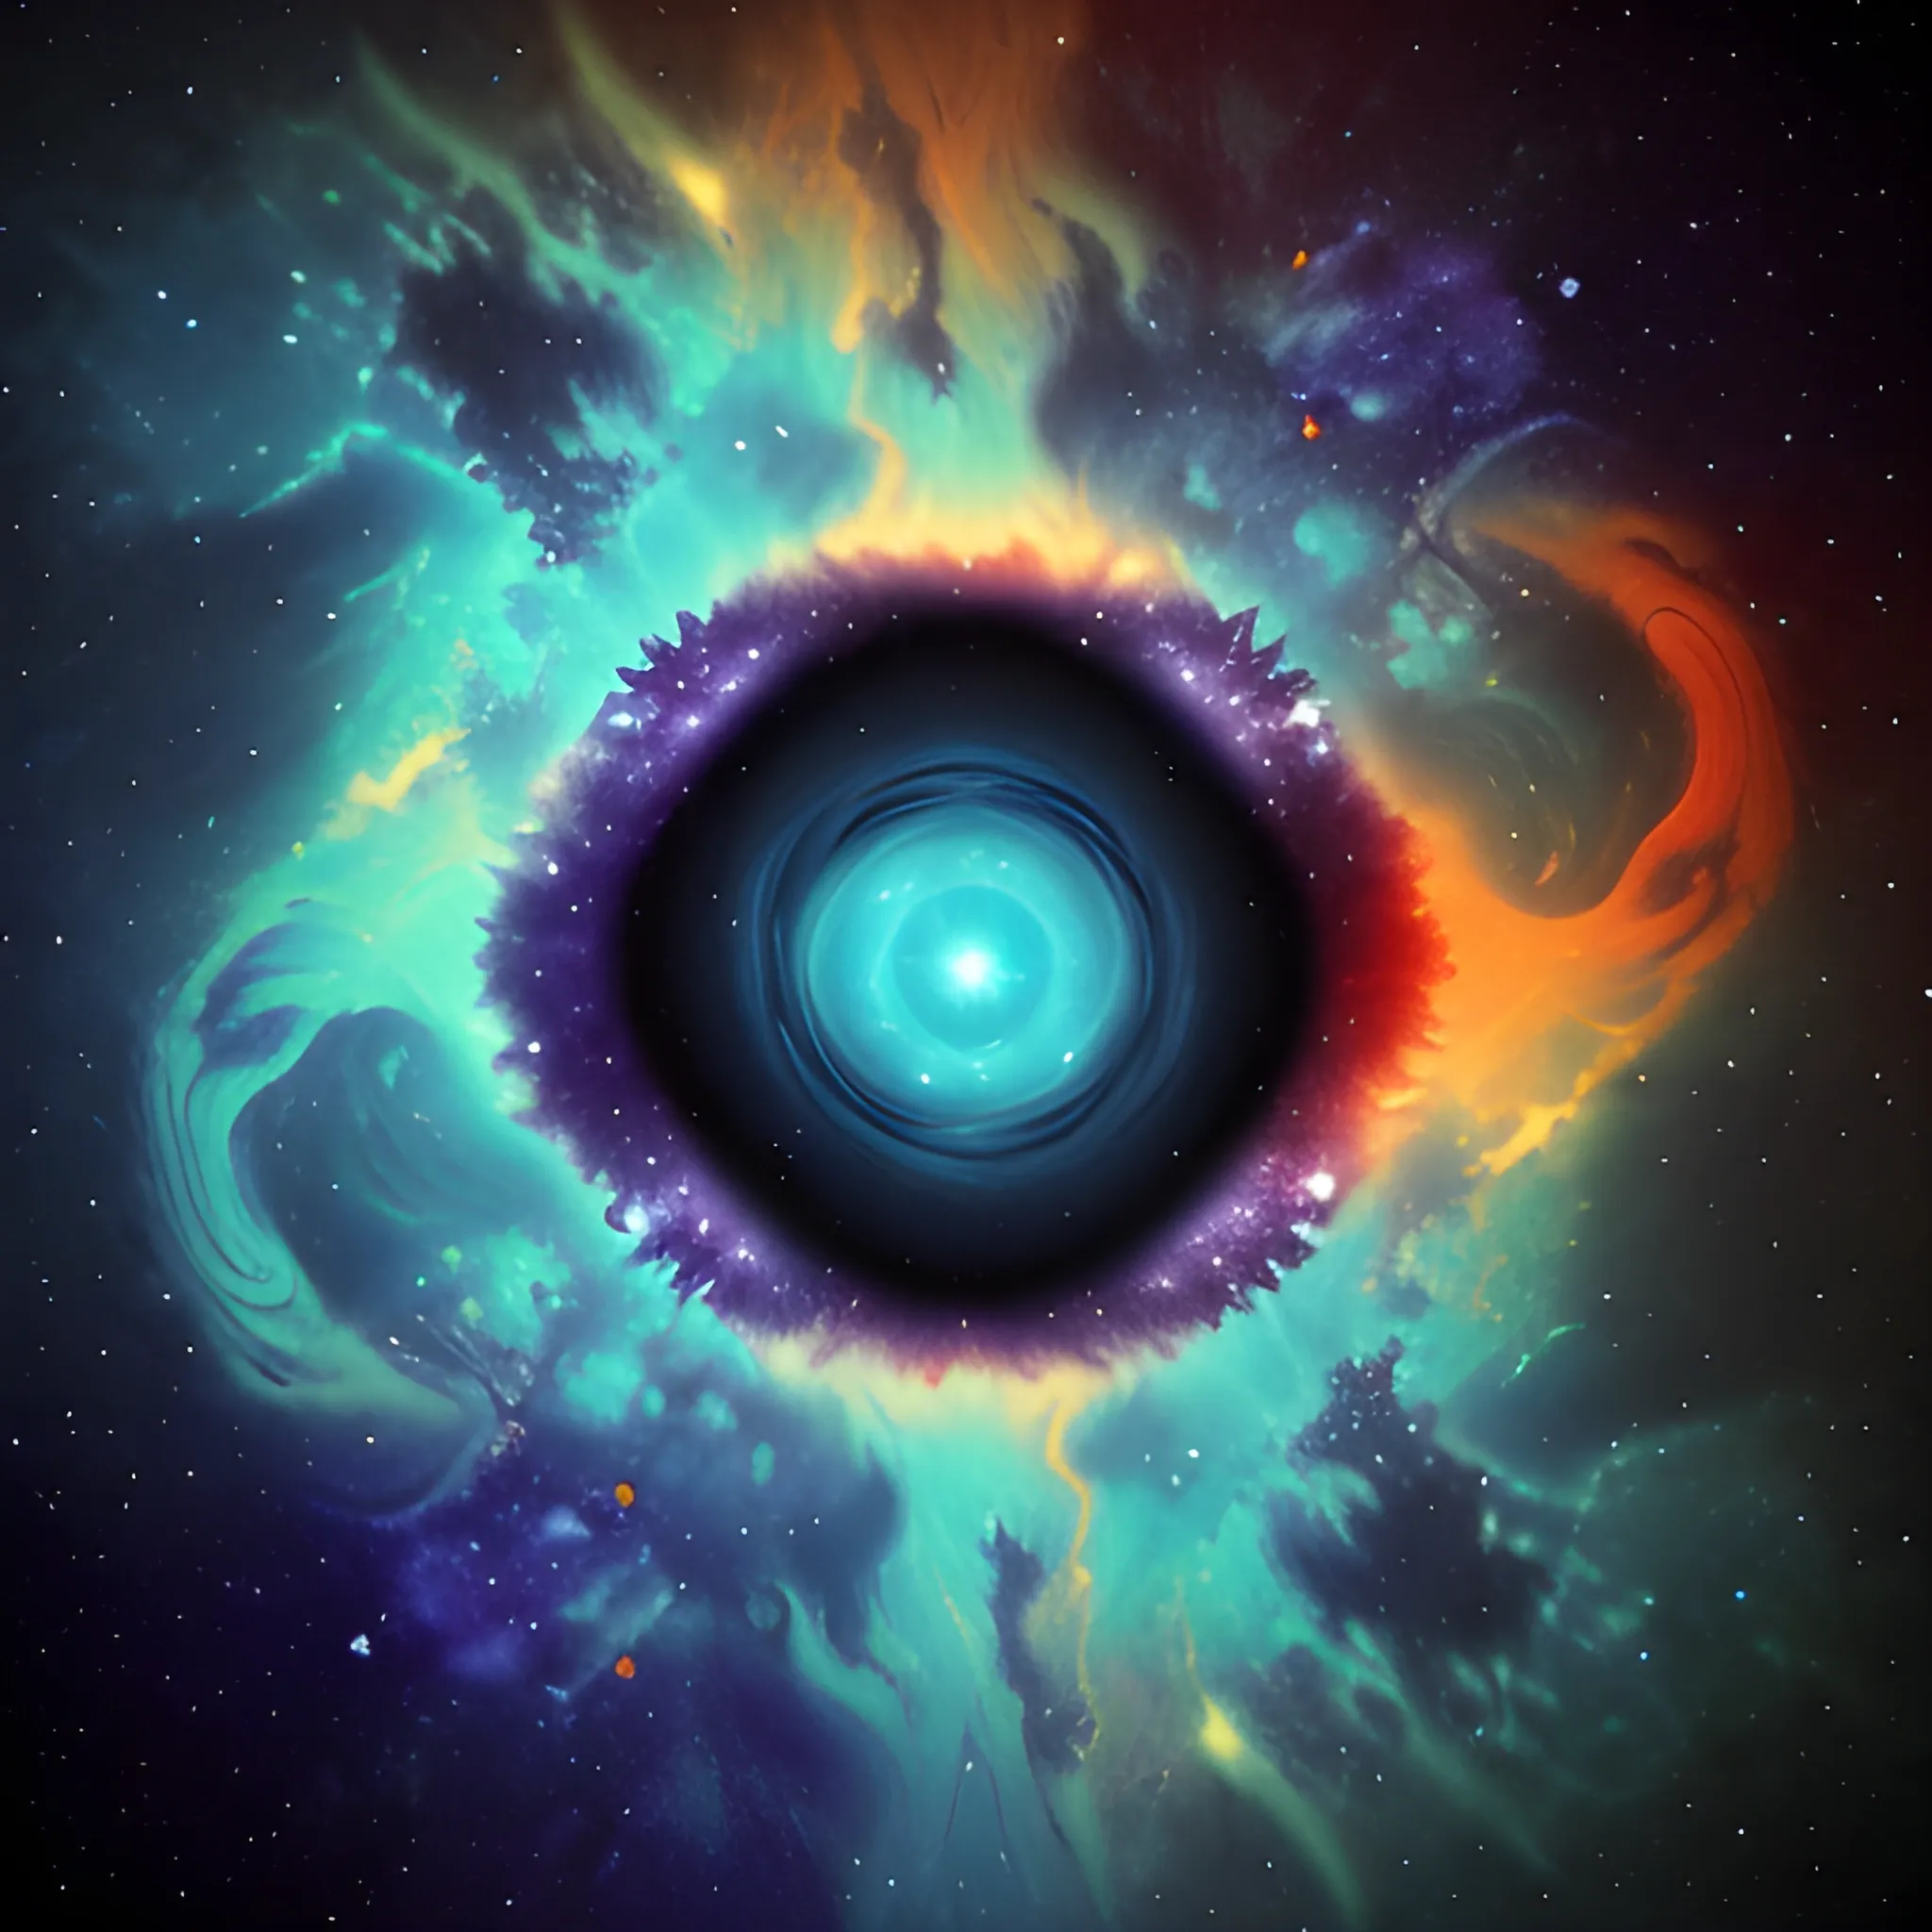 nebula - wallpapers wallpapers art by adam, in the style of surreal and dreamlike compositions, chiaroscuro woodcuts, mind-bending sculptures, national geographic photo, realistic landscape paintings, dark gold and dark cyan, eye-catching composition --ar 9:16